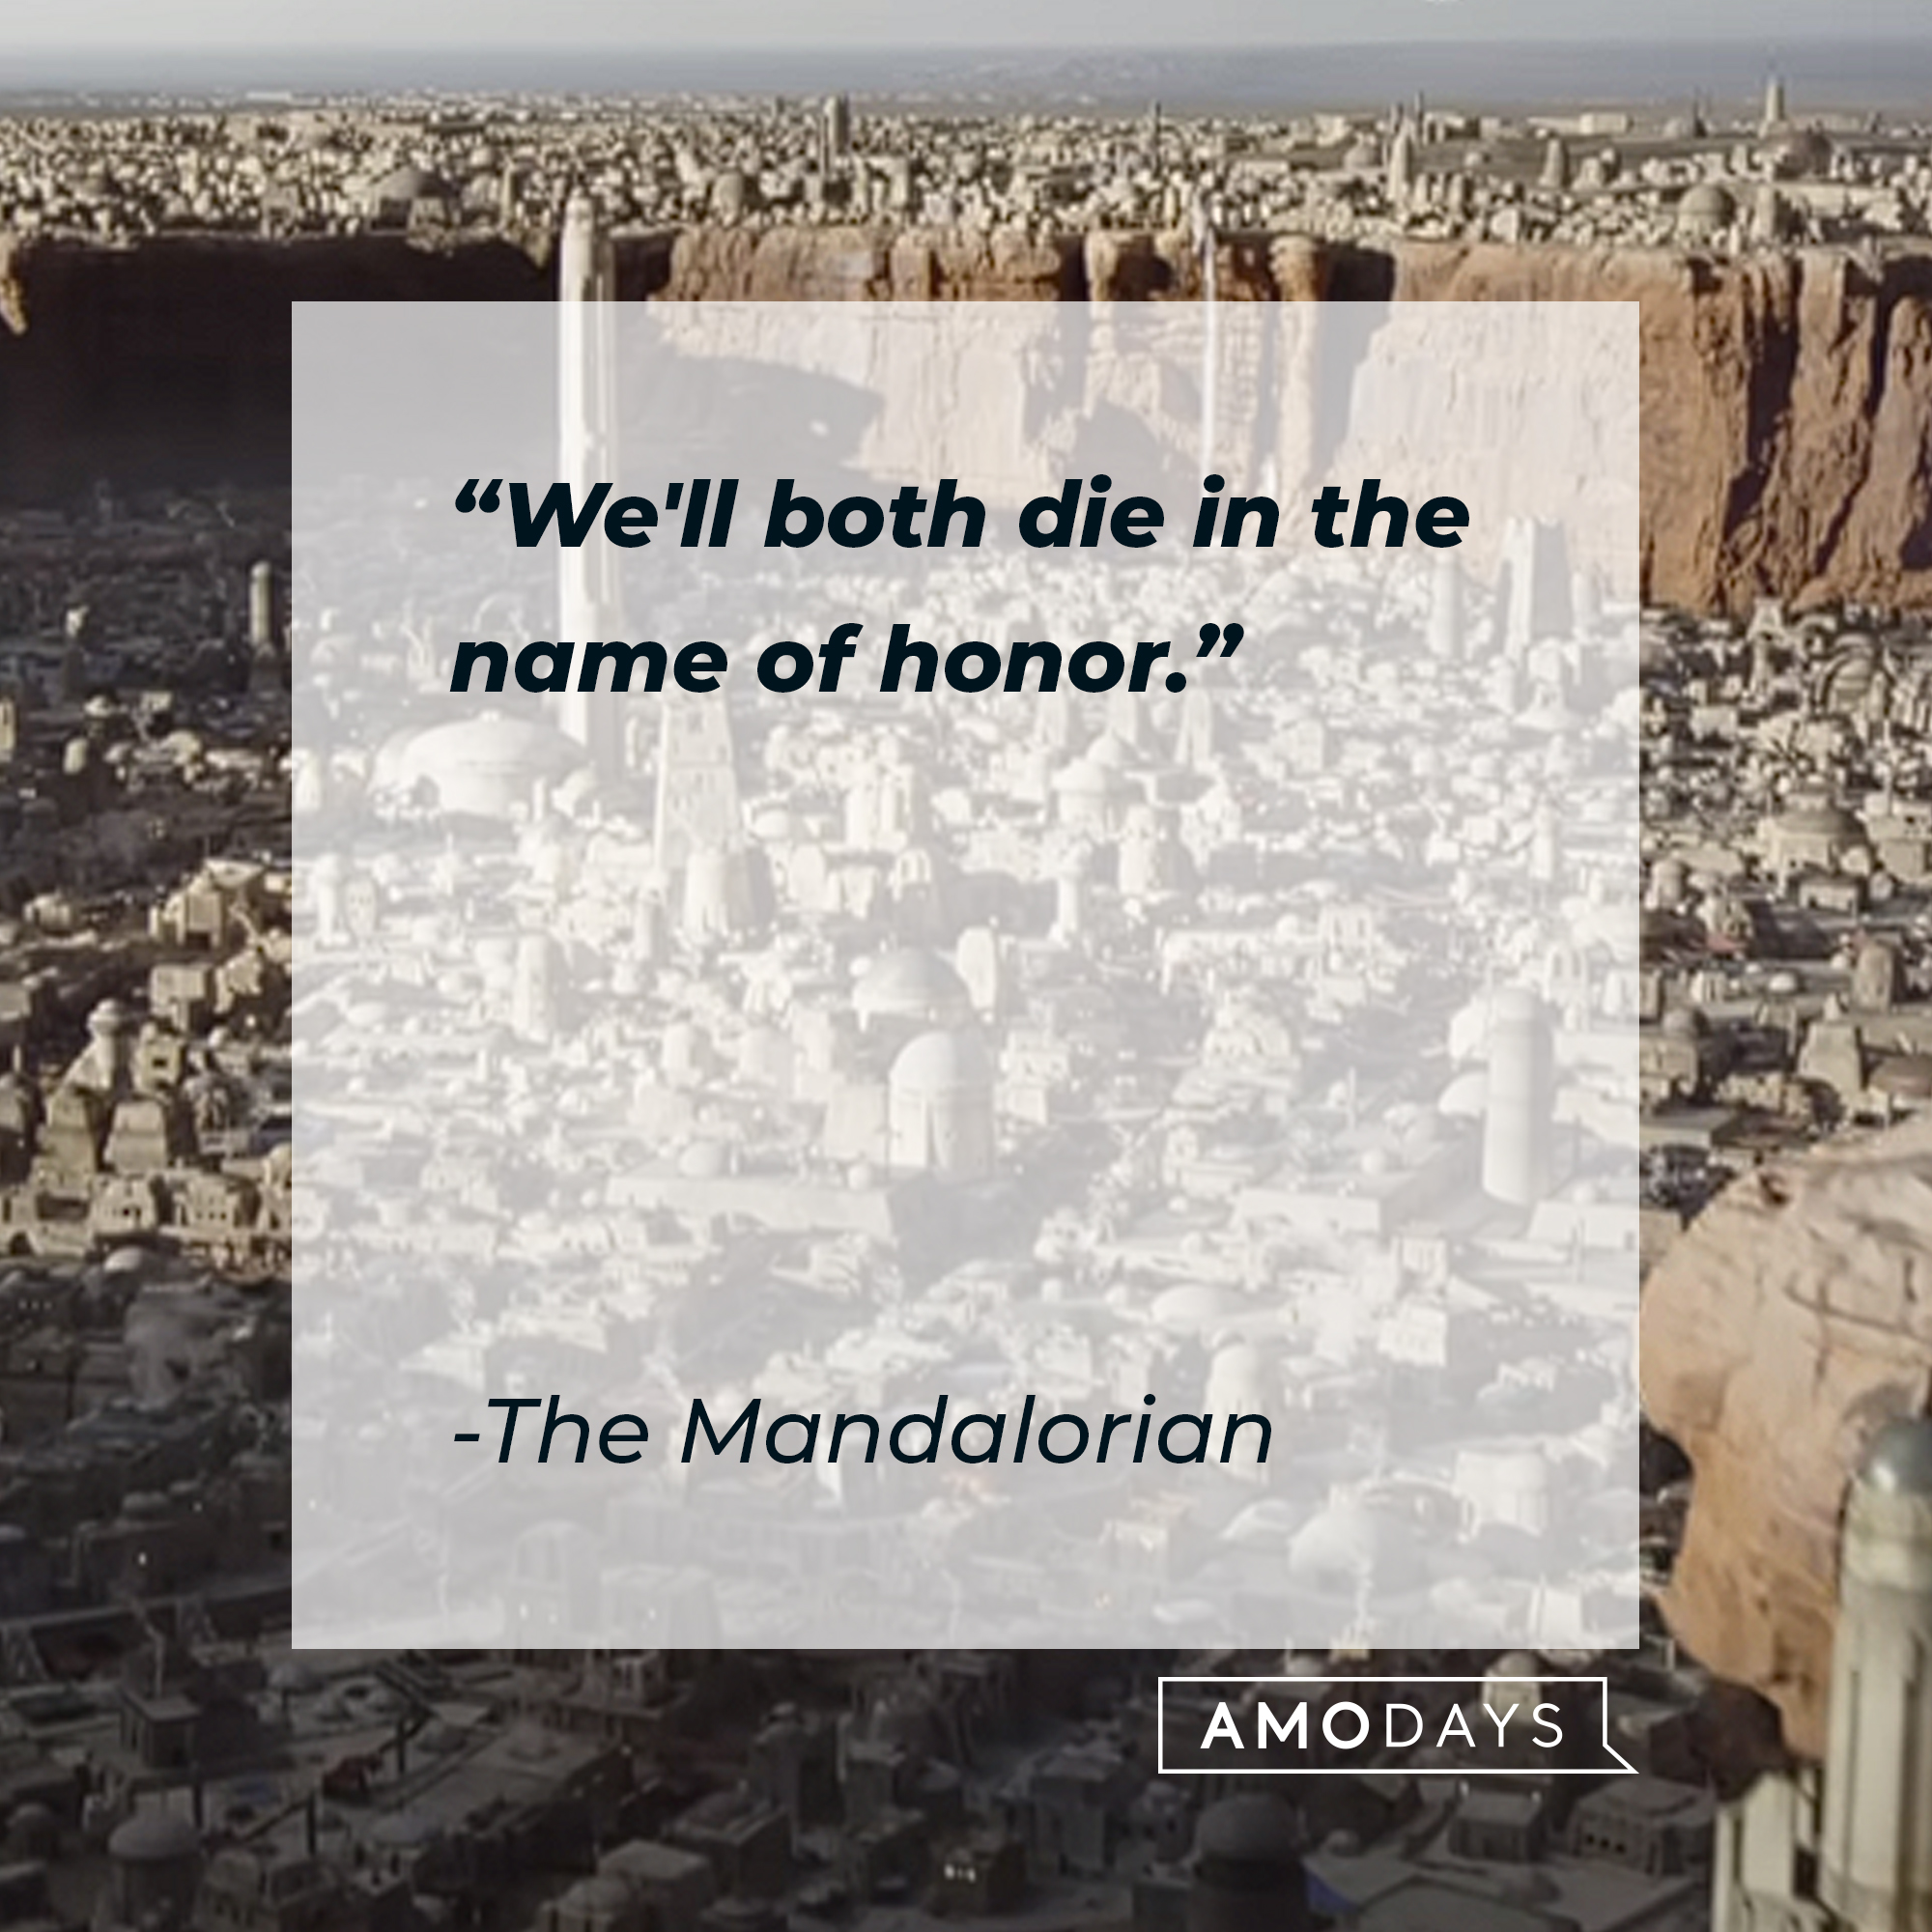 The Mandalorian's quote: "We'll both die in the name of honor." | Source: youtube.com/StarWars